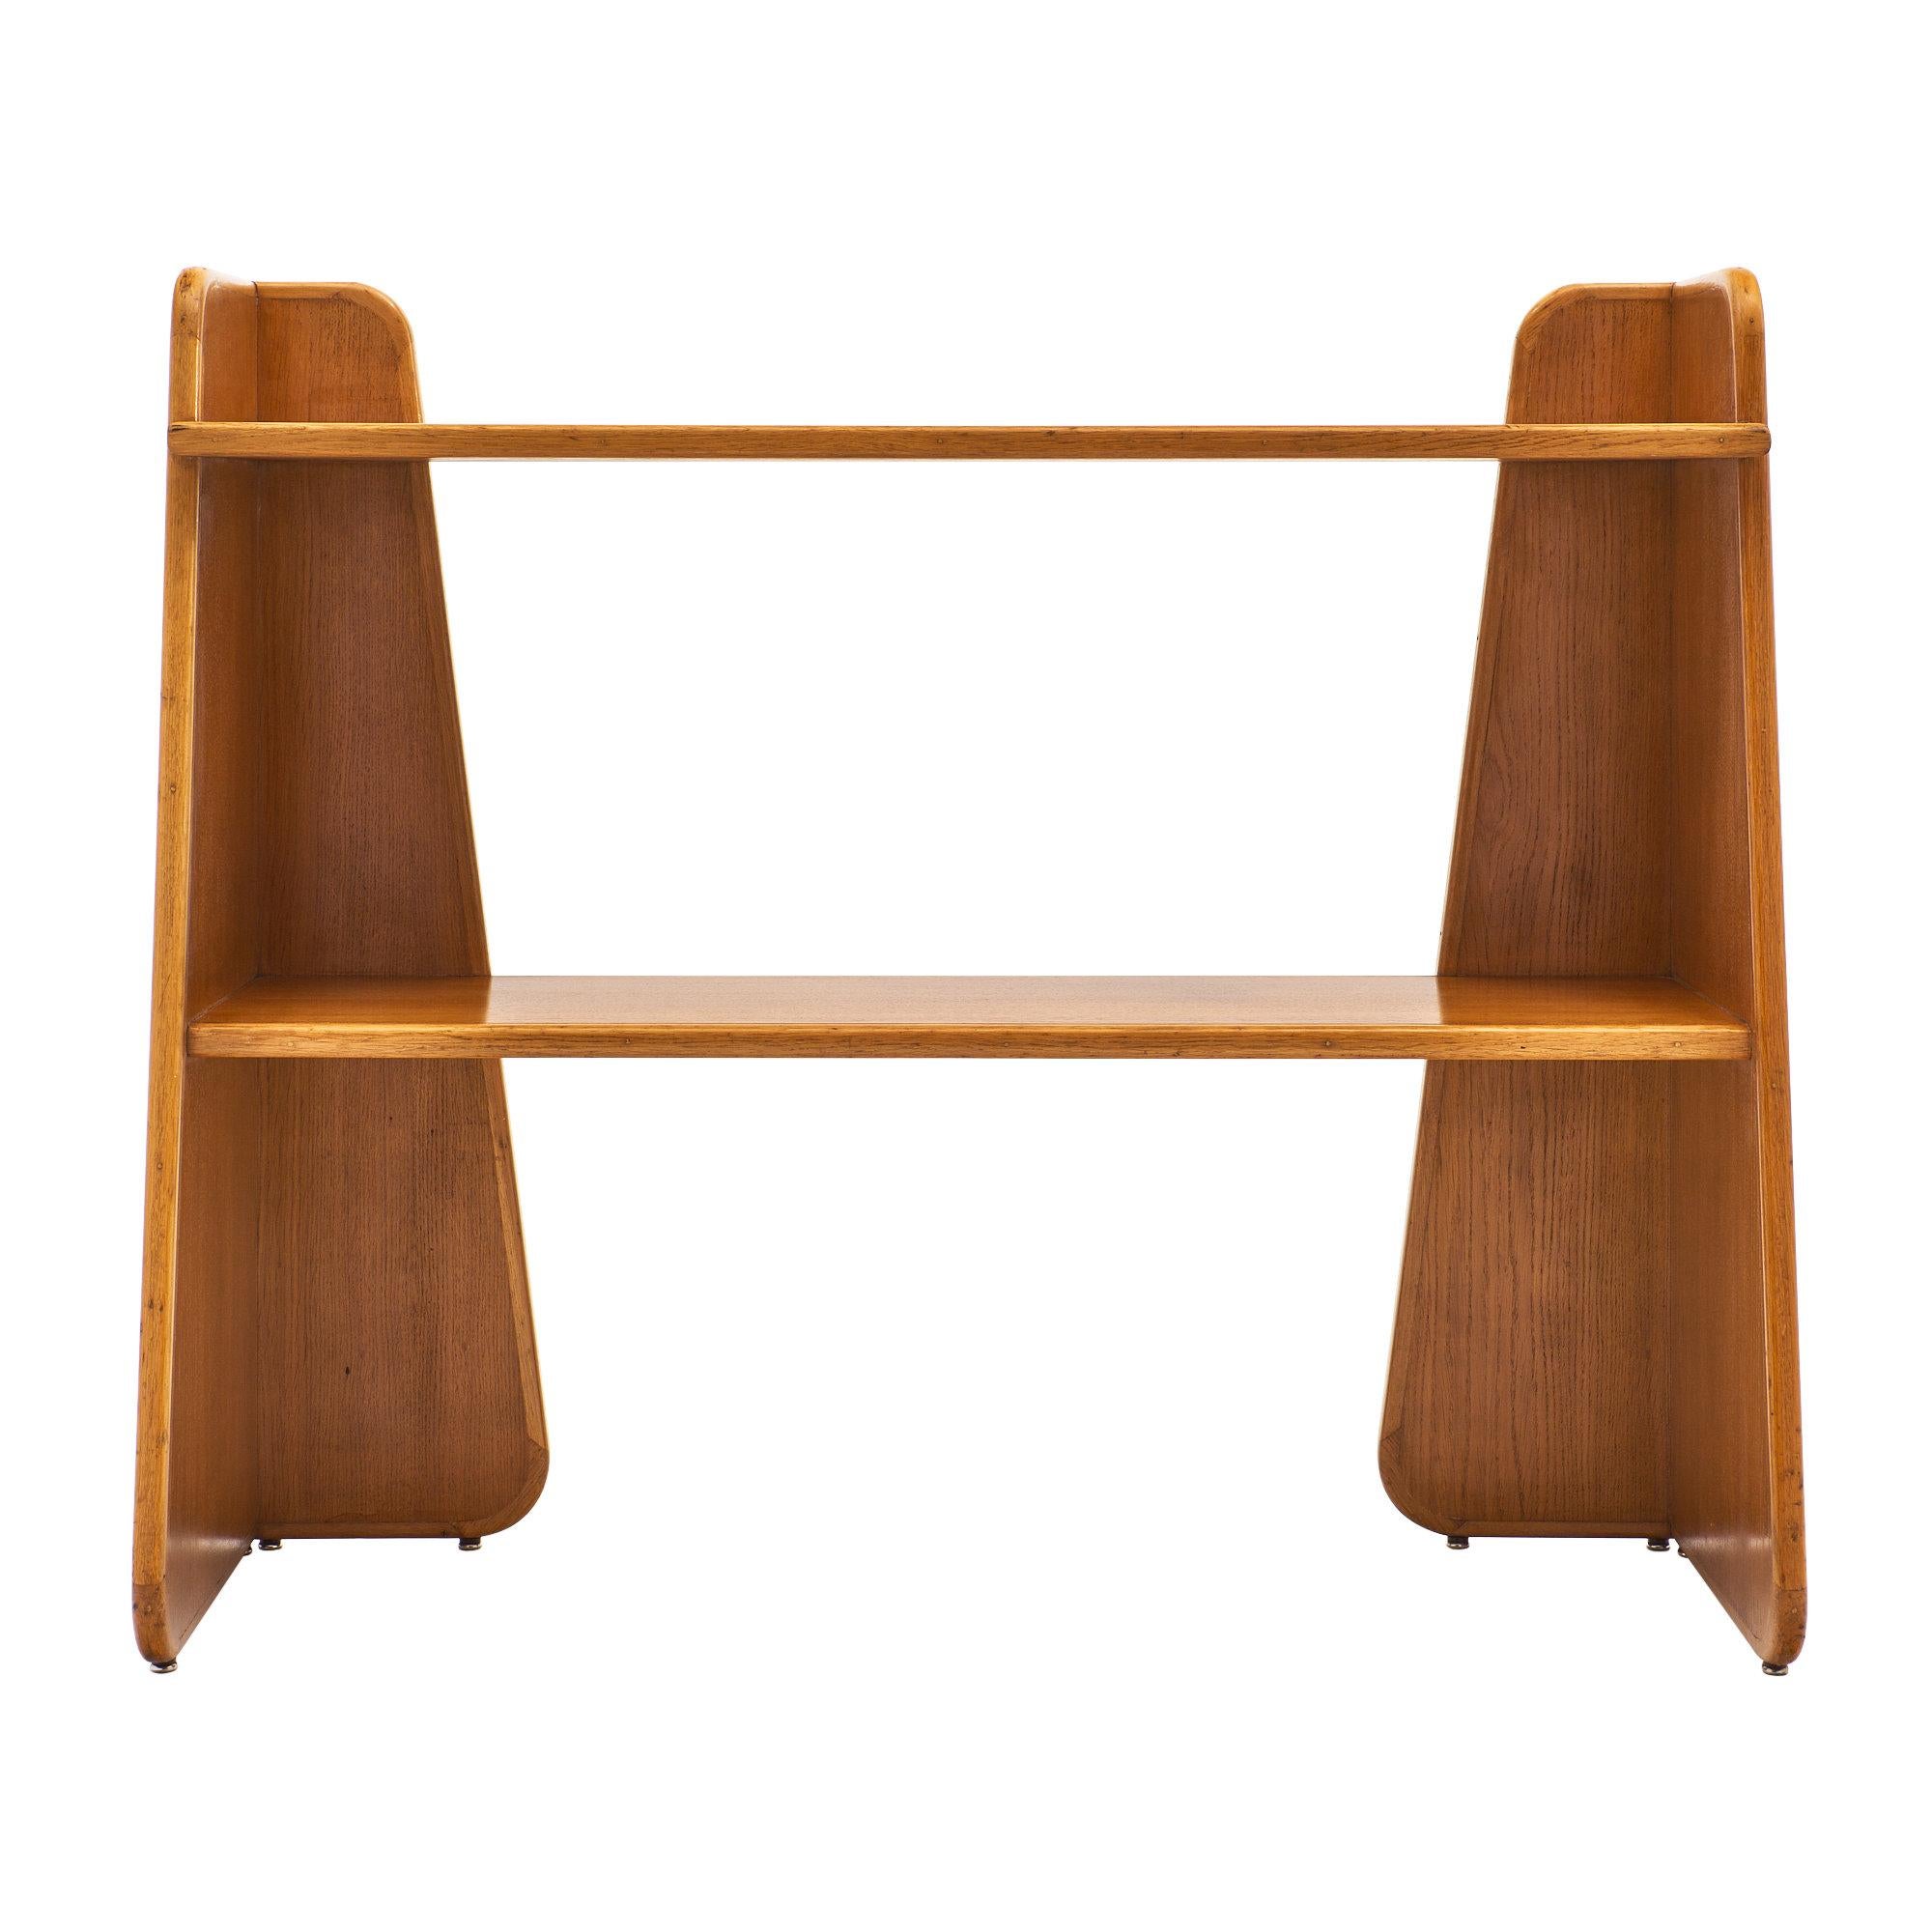 Pierre Chareau Style French Modernist Console